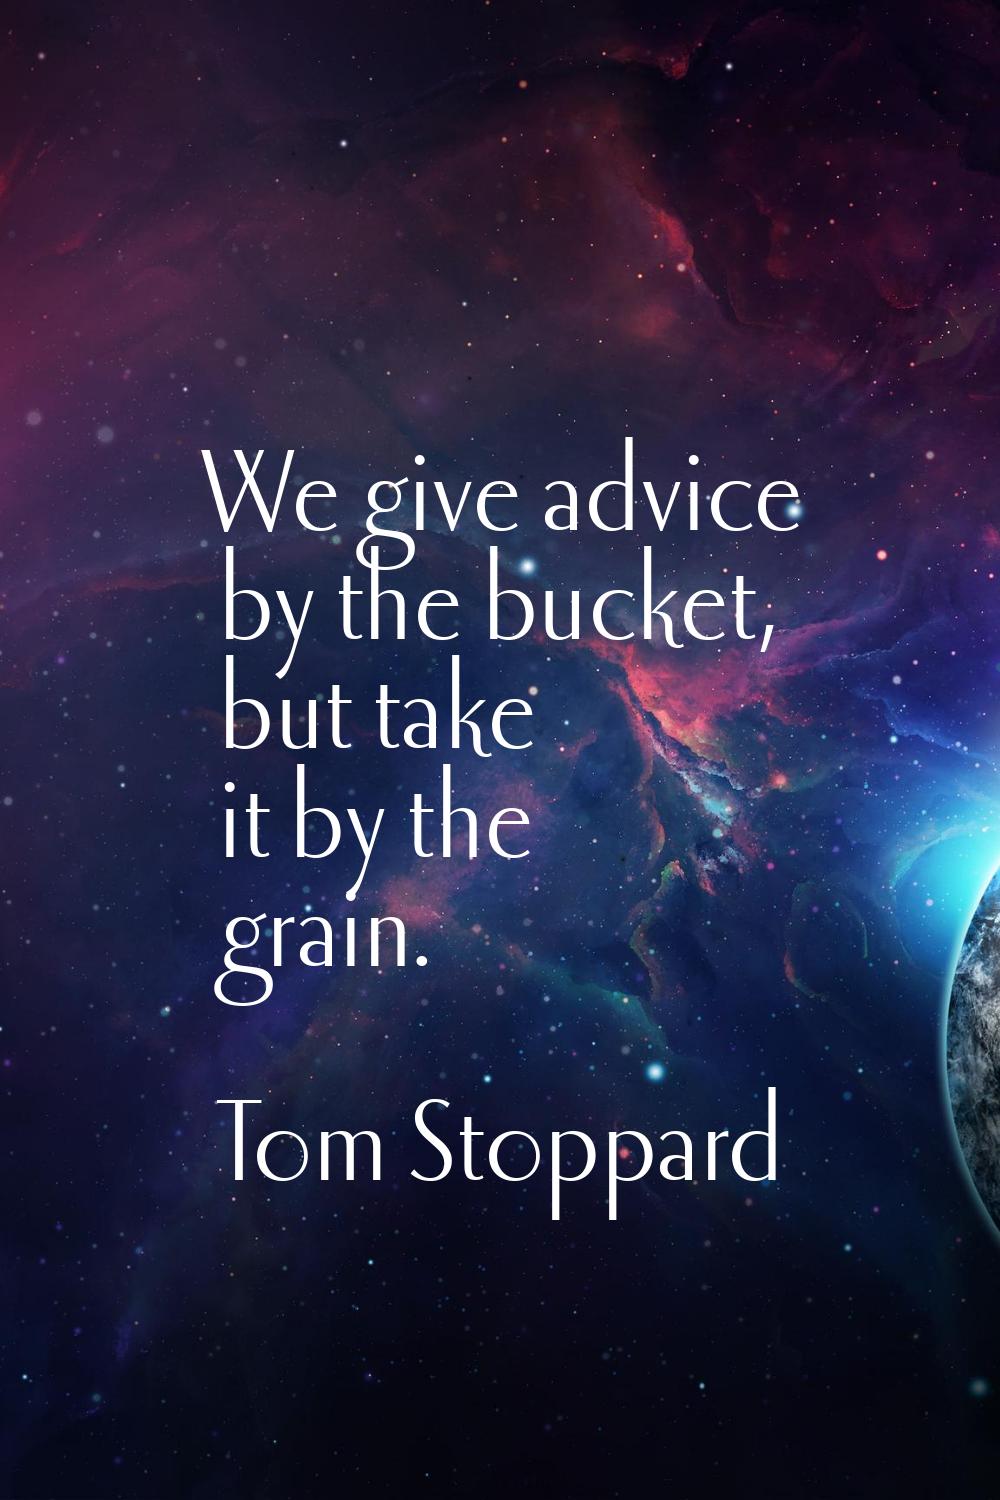 We give advice by the bucket, but take it by the grain.